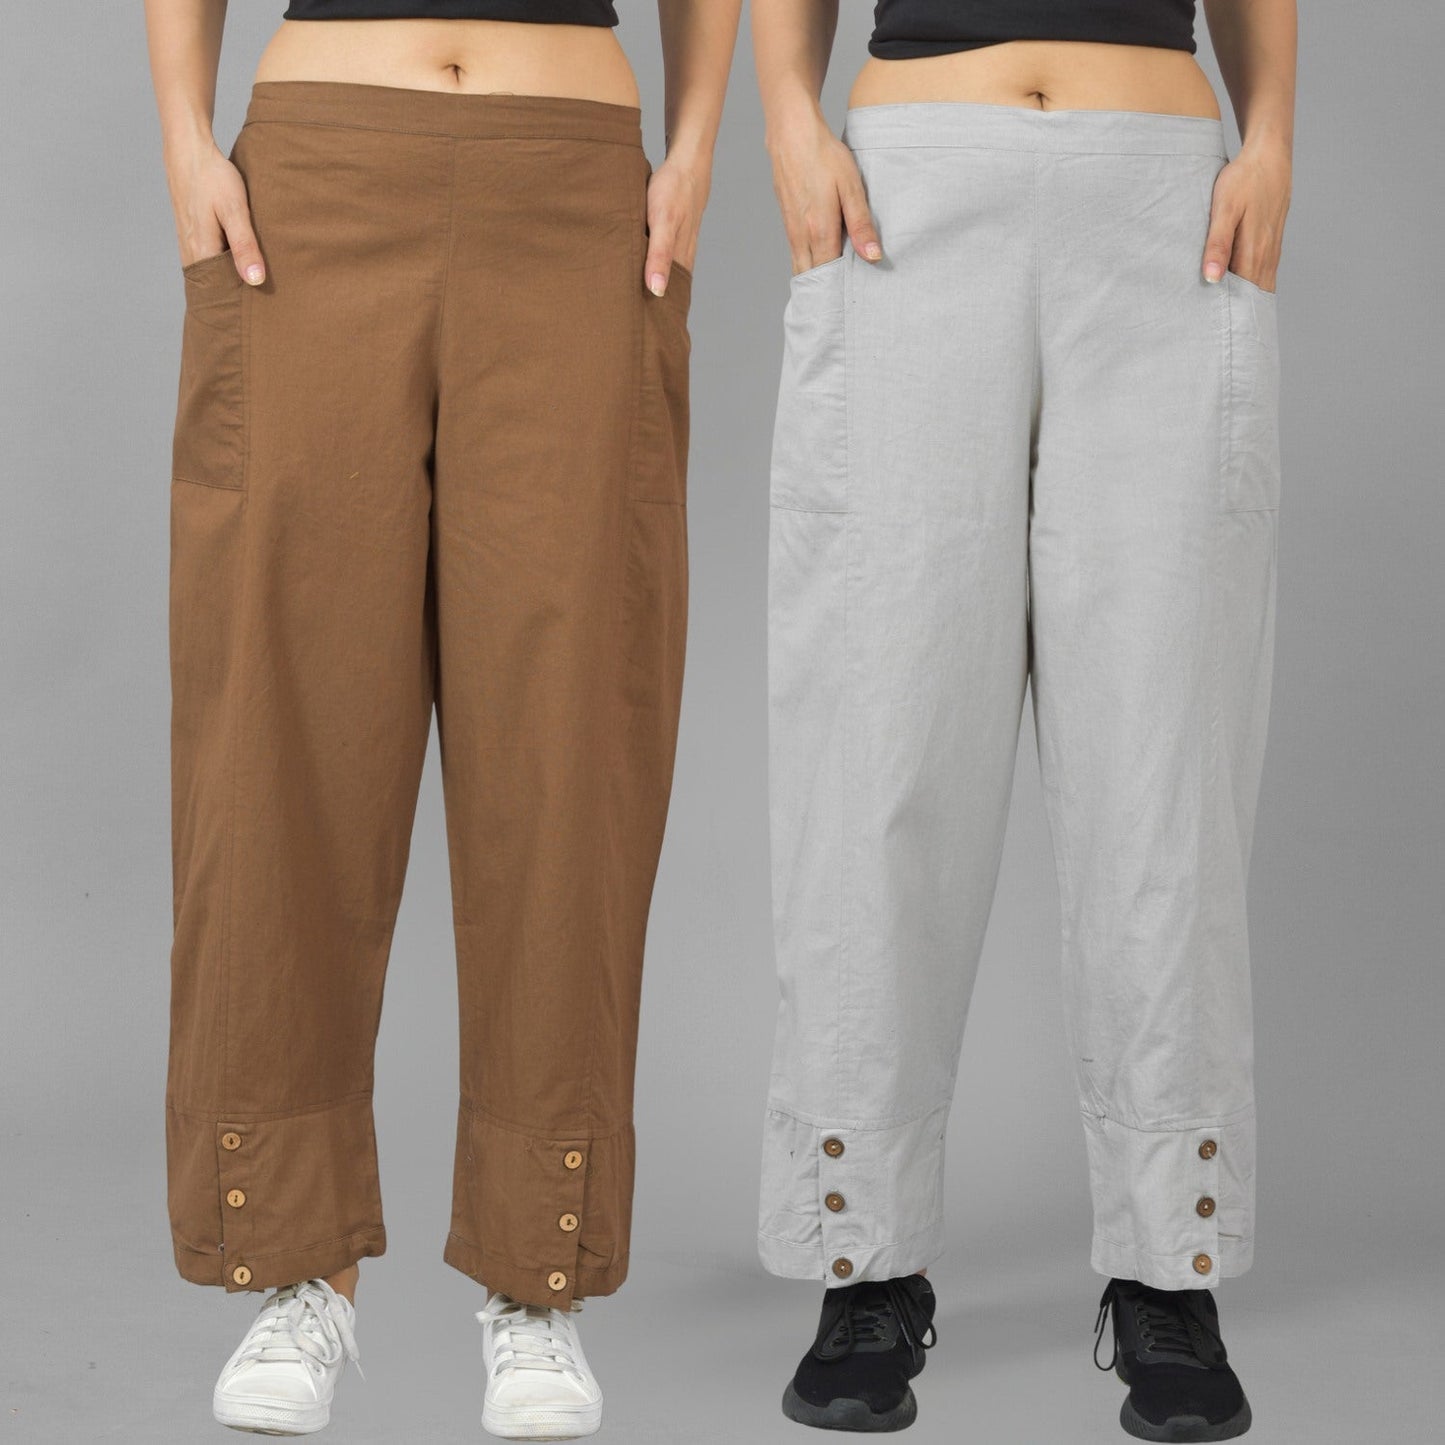 Combo Pack Of Womens Brown And Melange Grey Side Pocket Straight Cargo Pants